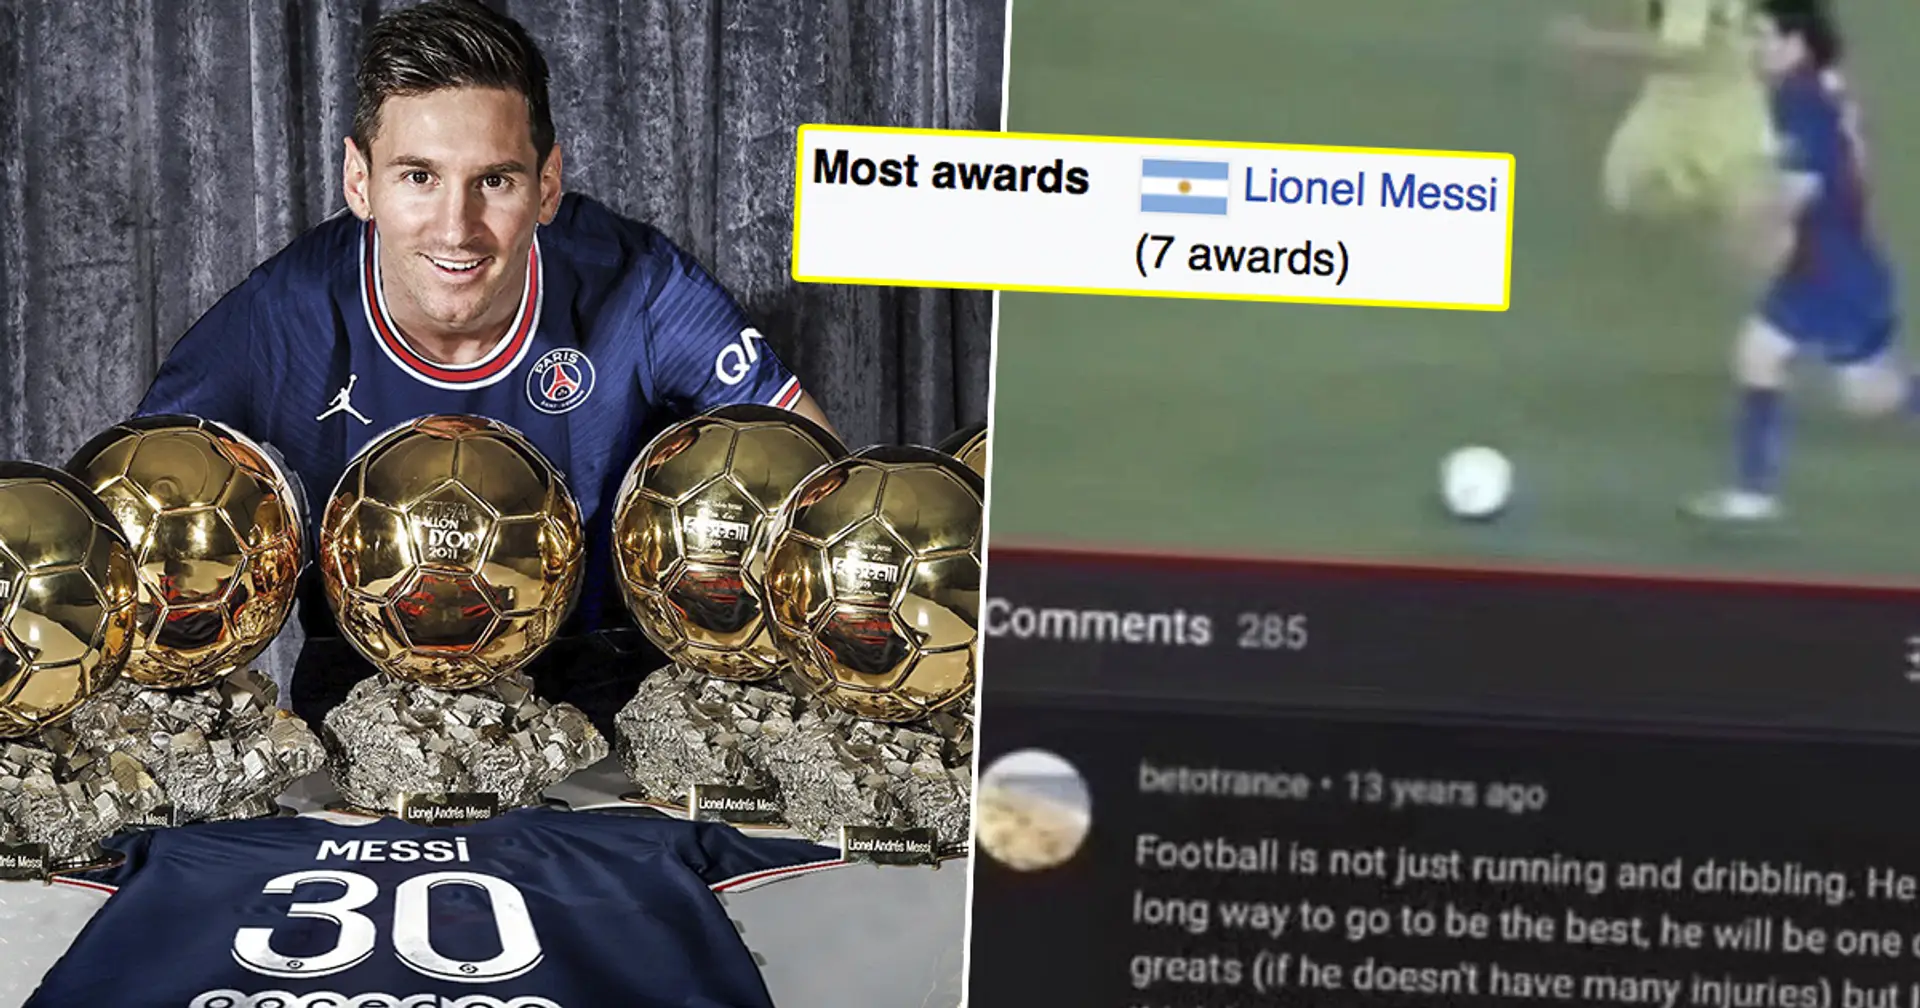 'Football isn't just running and dribbling': Worst-ever Ballon d'Or prediction on Messi straight from 2008